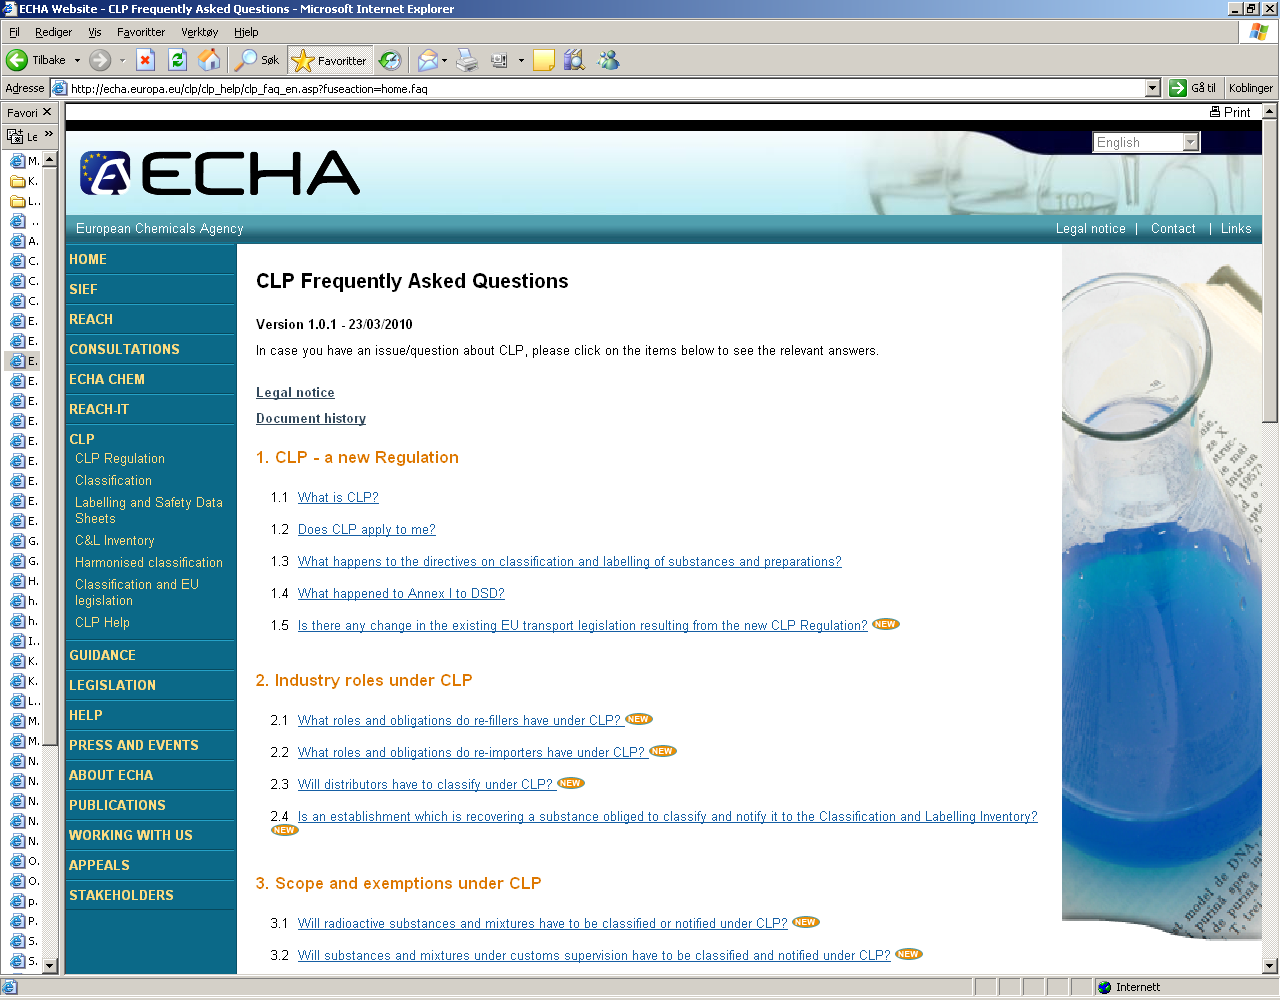 Frequently asked question, FAQ http://echa.europa.